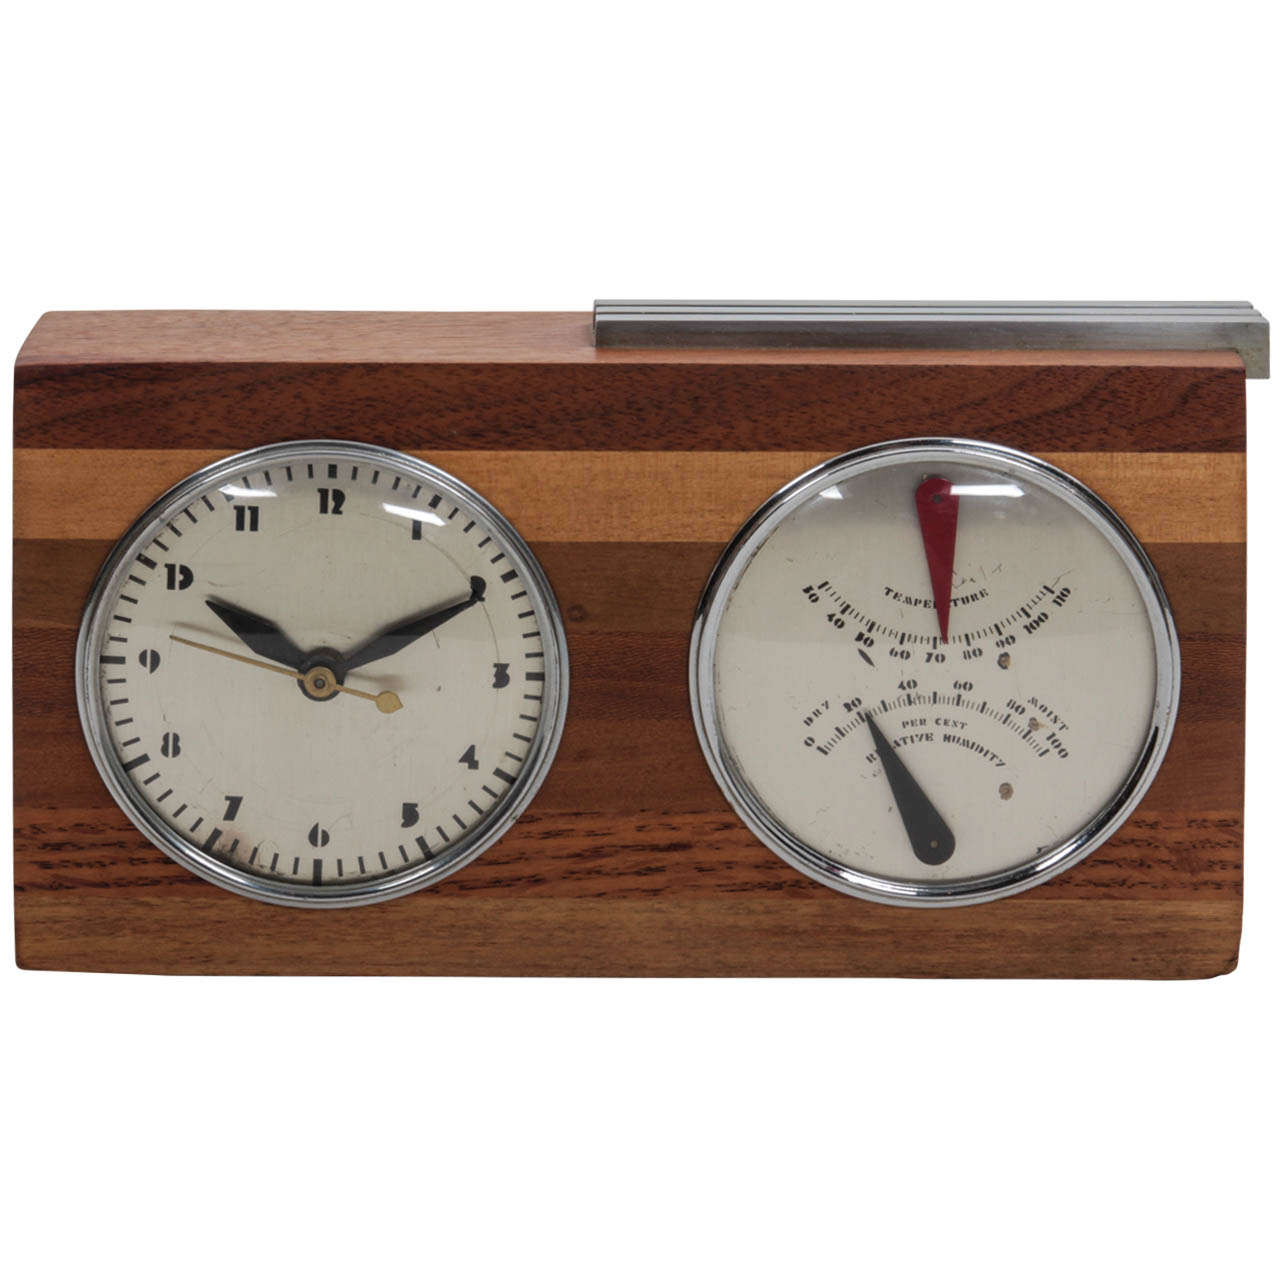 Gilbert Rohde Herman Miller American Modernist Clock and Thermometer, circa 1933 For Sale